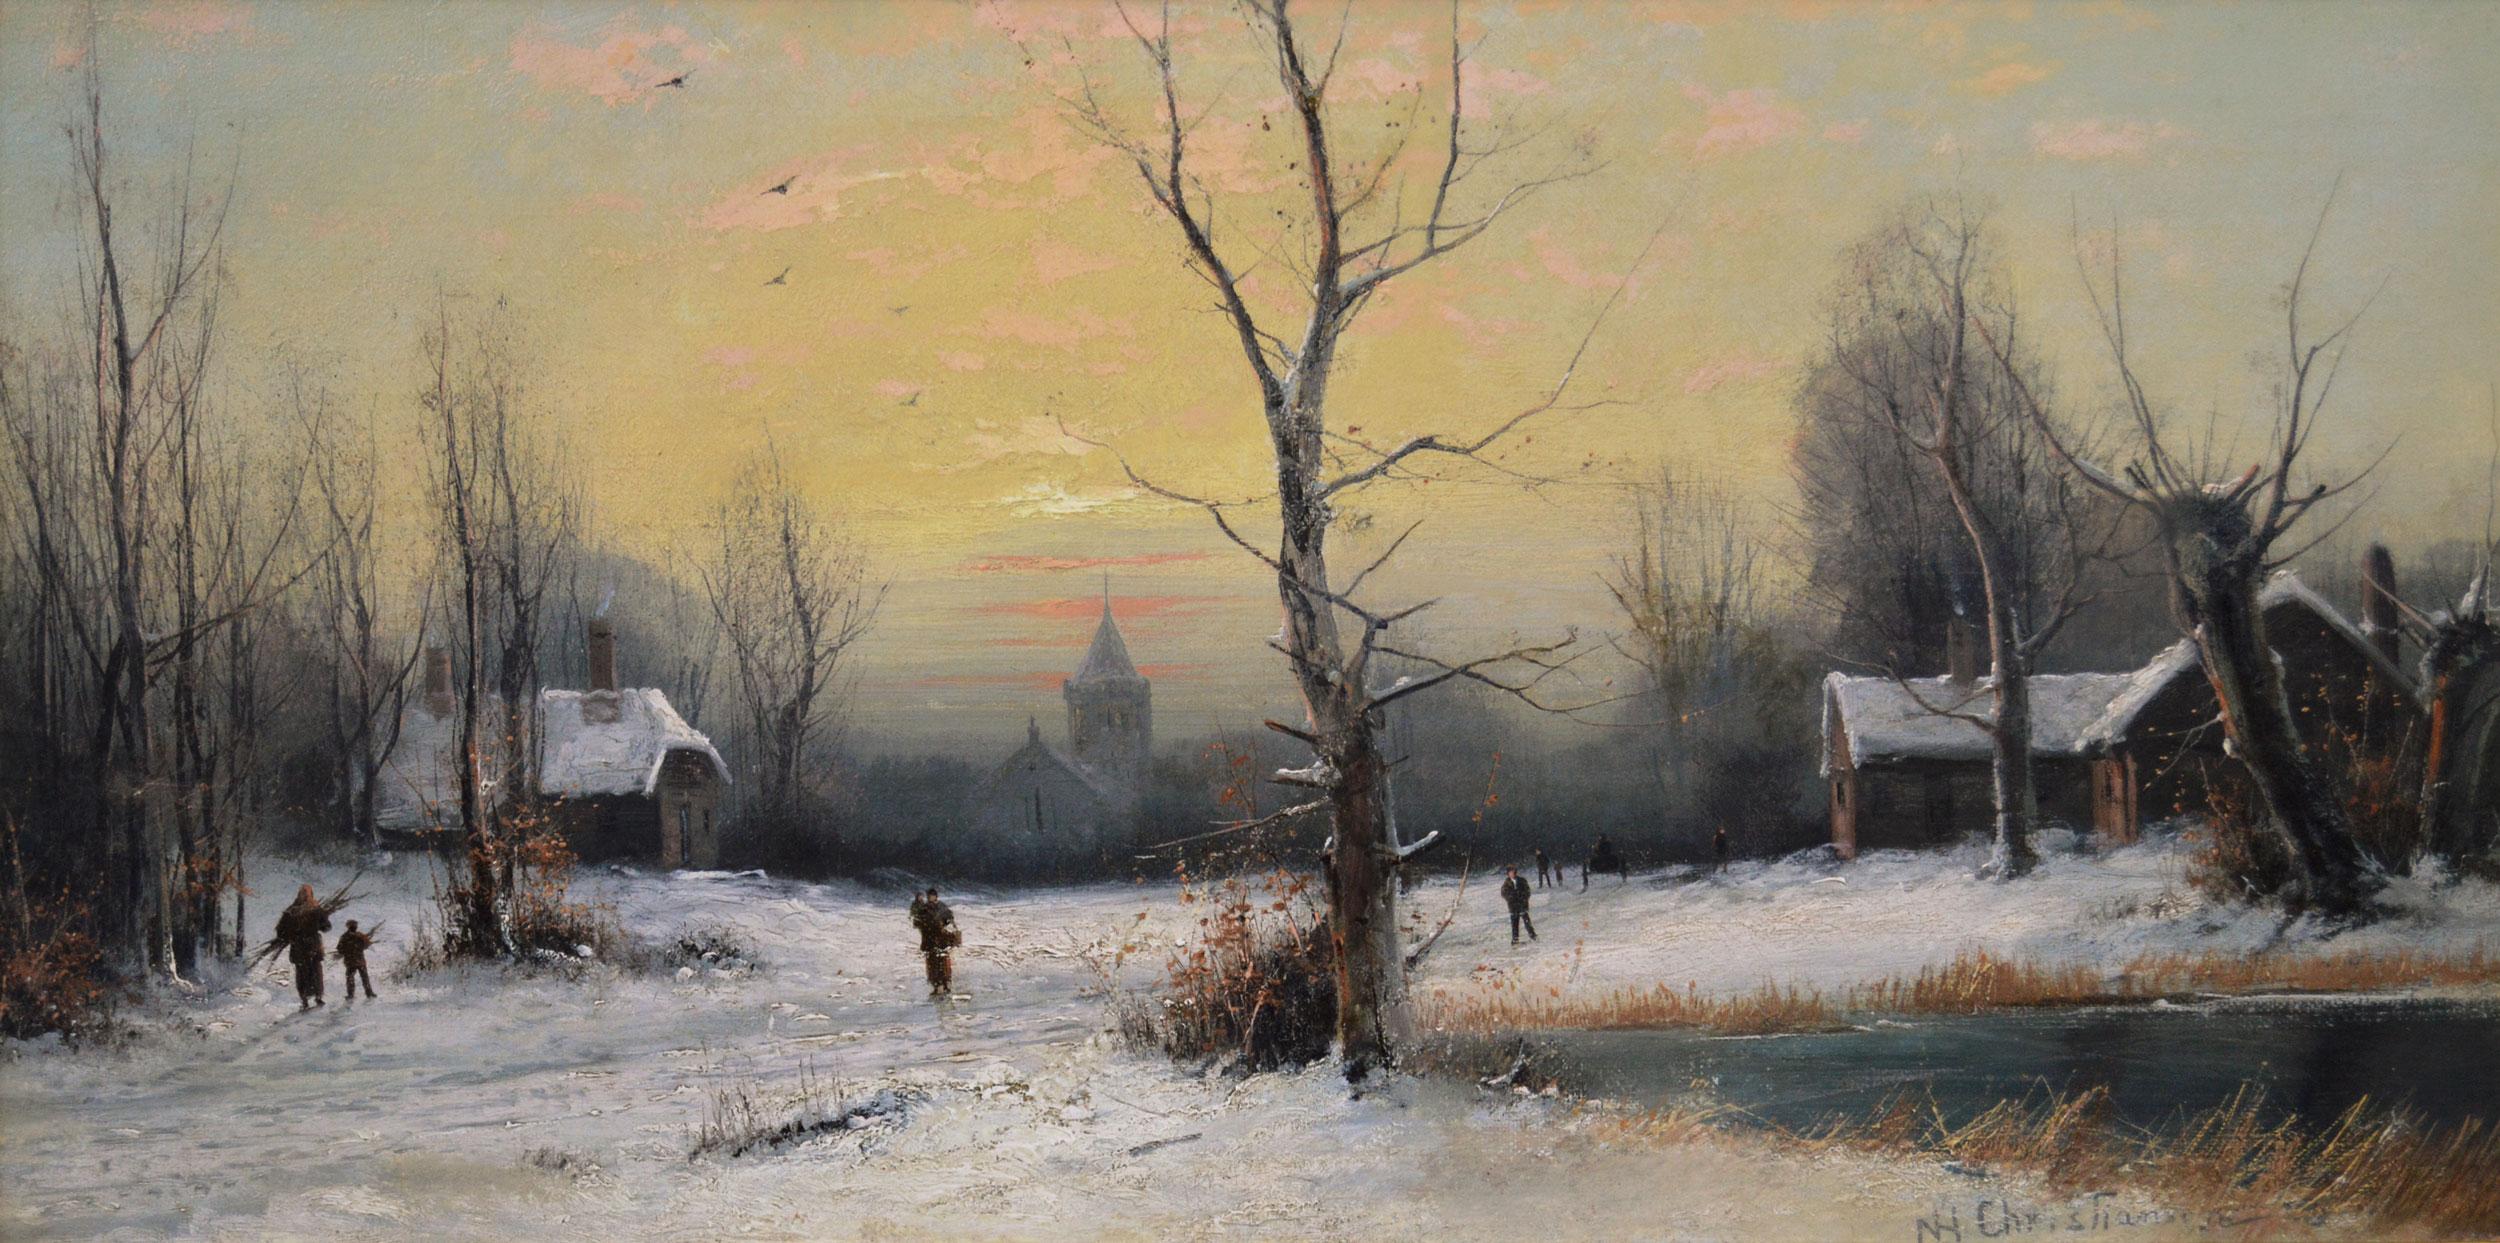 19th Century winter landscape oil painting of figures in a village  - Painting by Nils Hans Christiansen